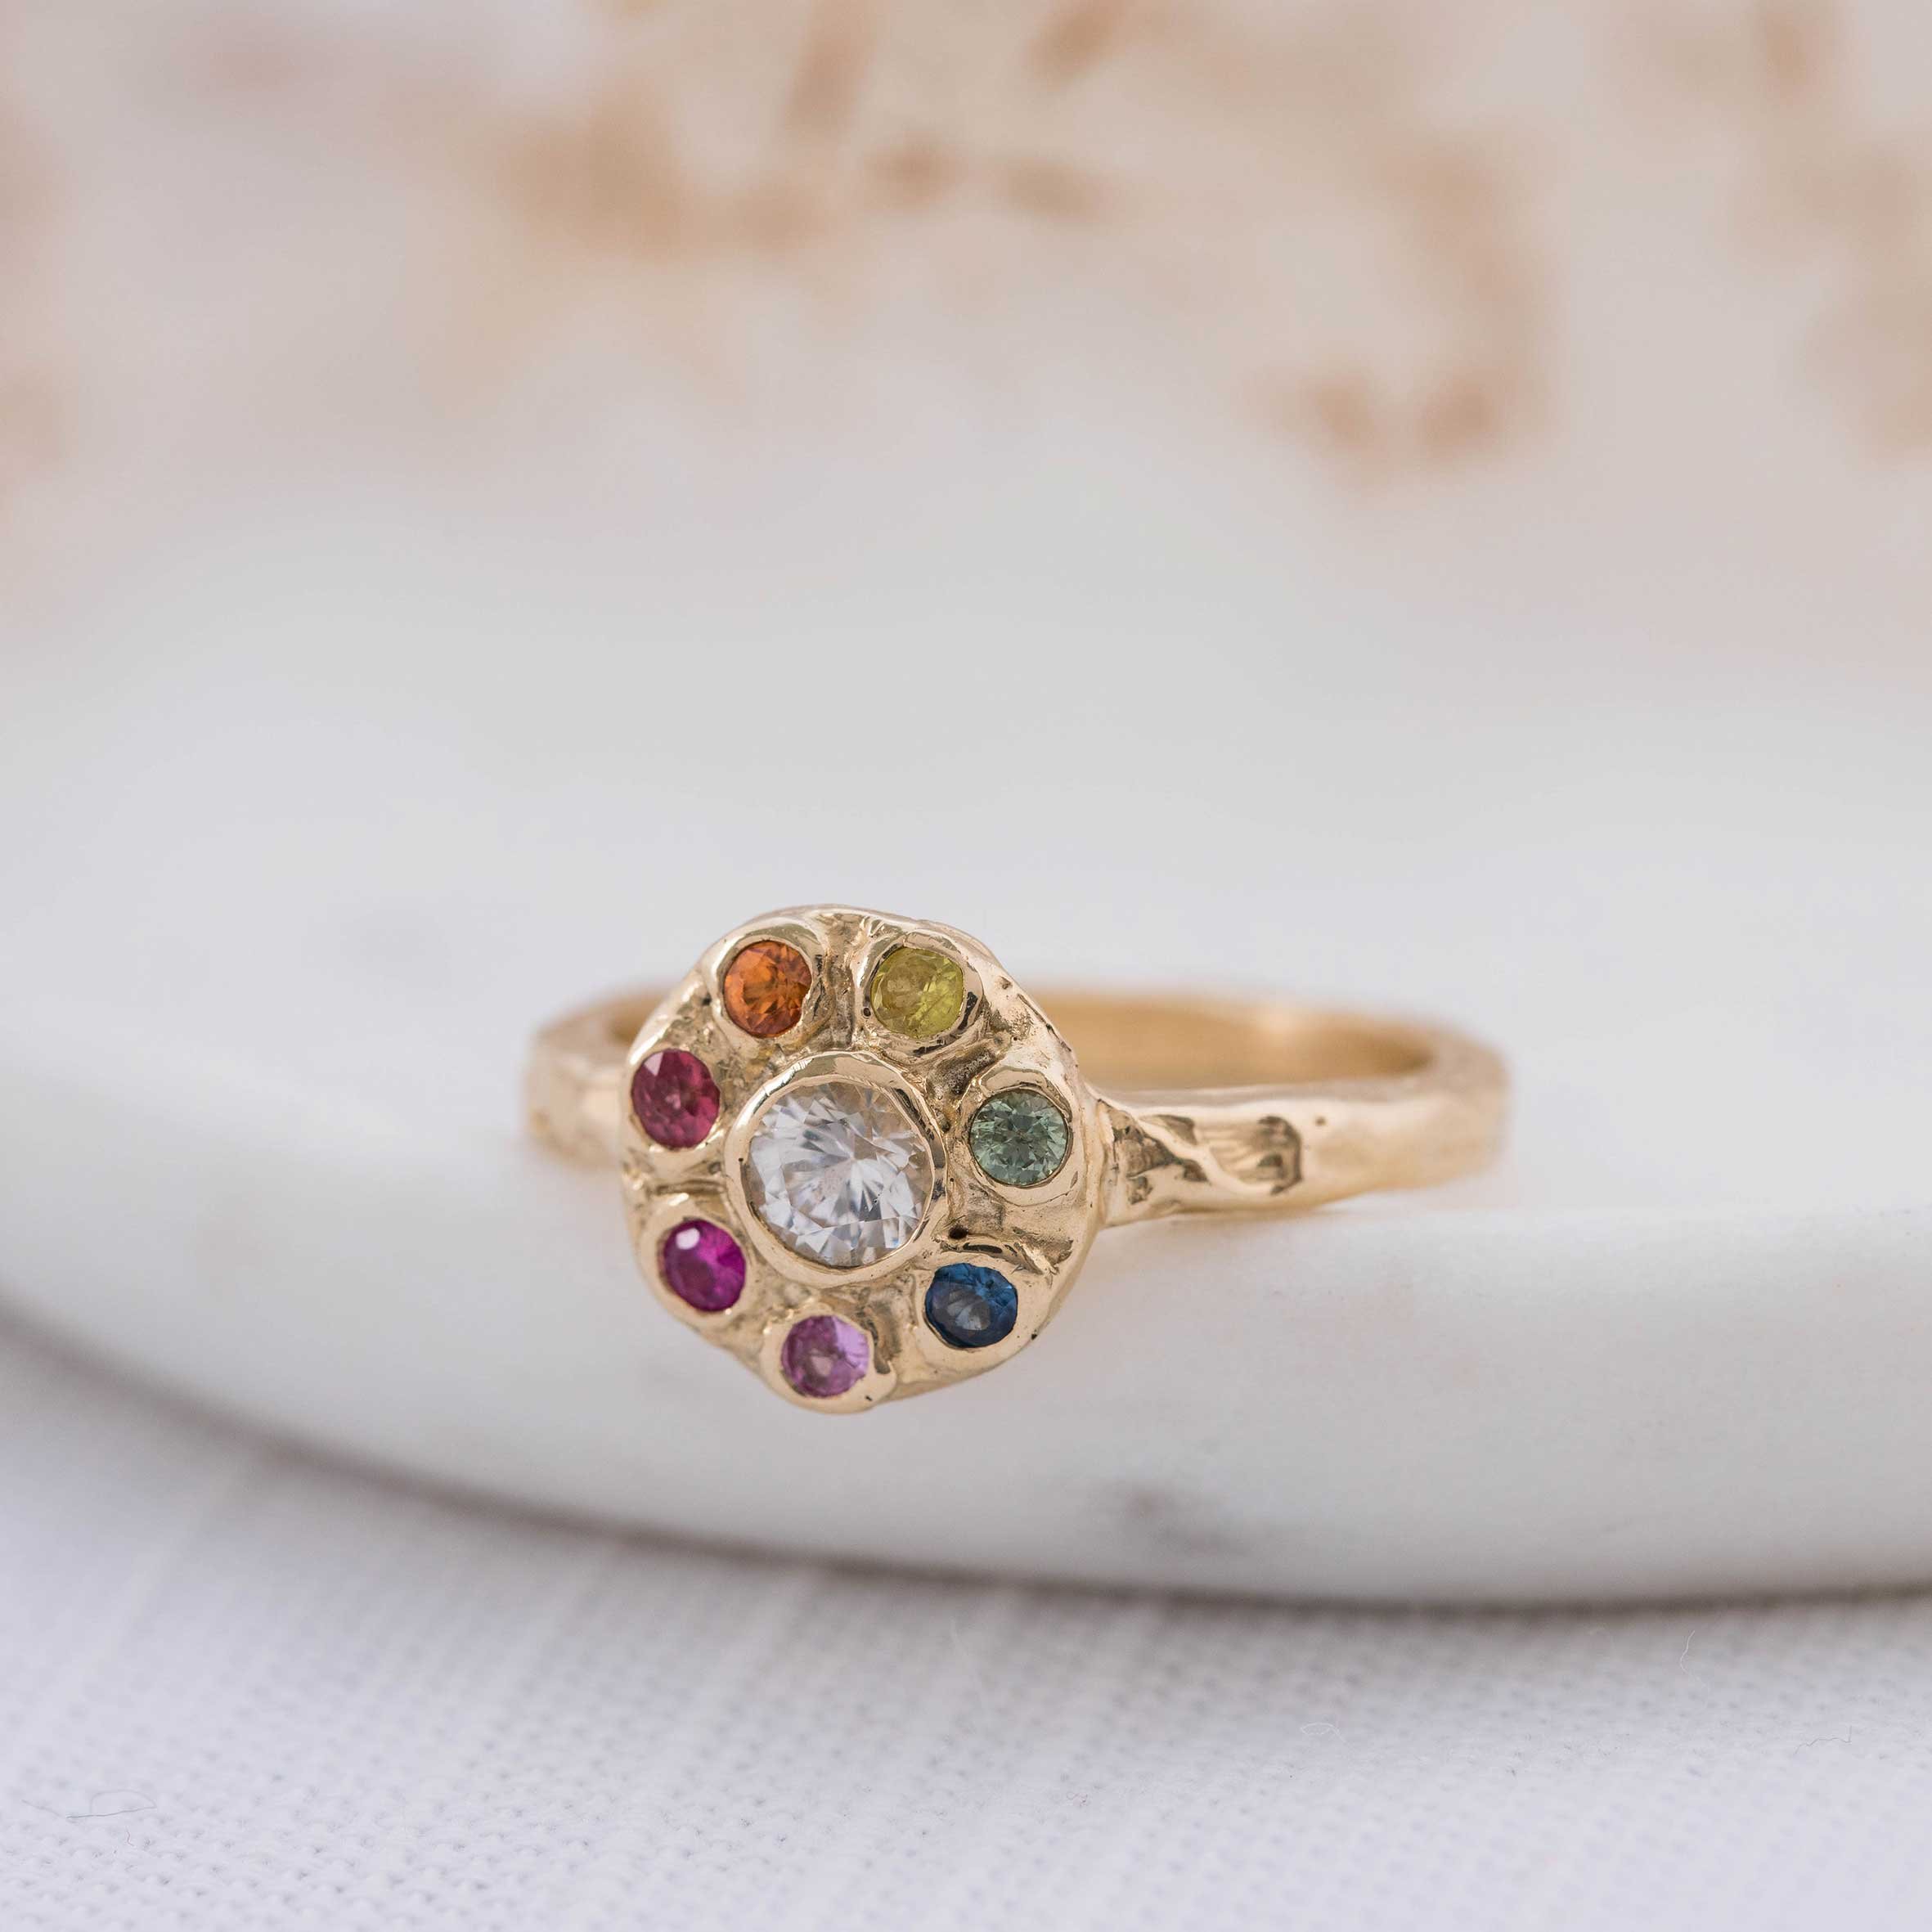 IRIDIANA Rainbow Sapphire Halo Ring by Anvil and Ivy